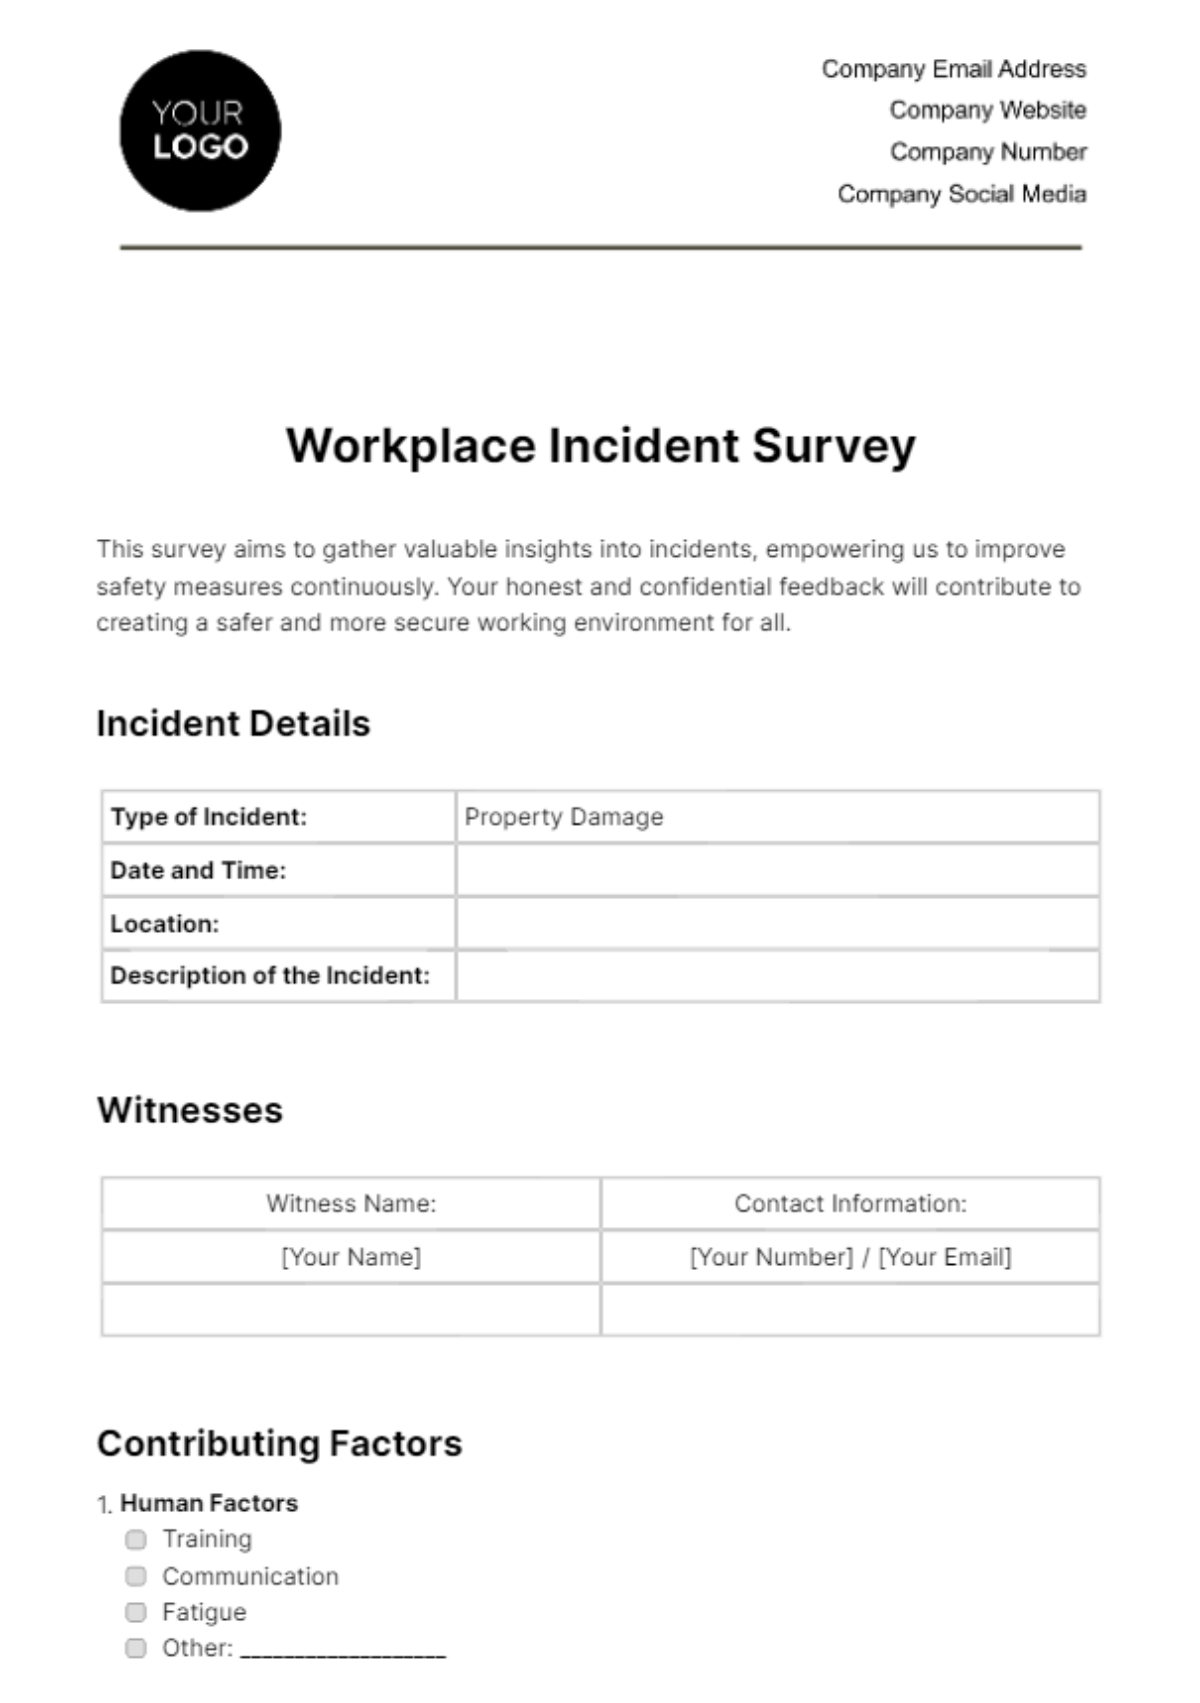 Workplace Incident Survey Template